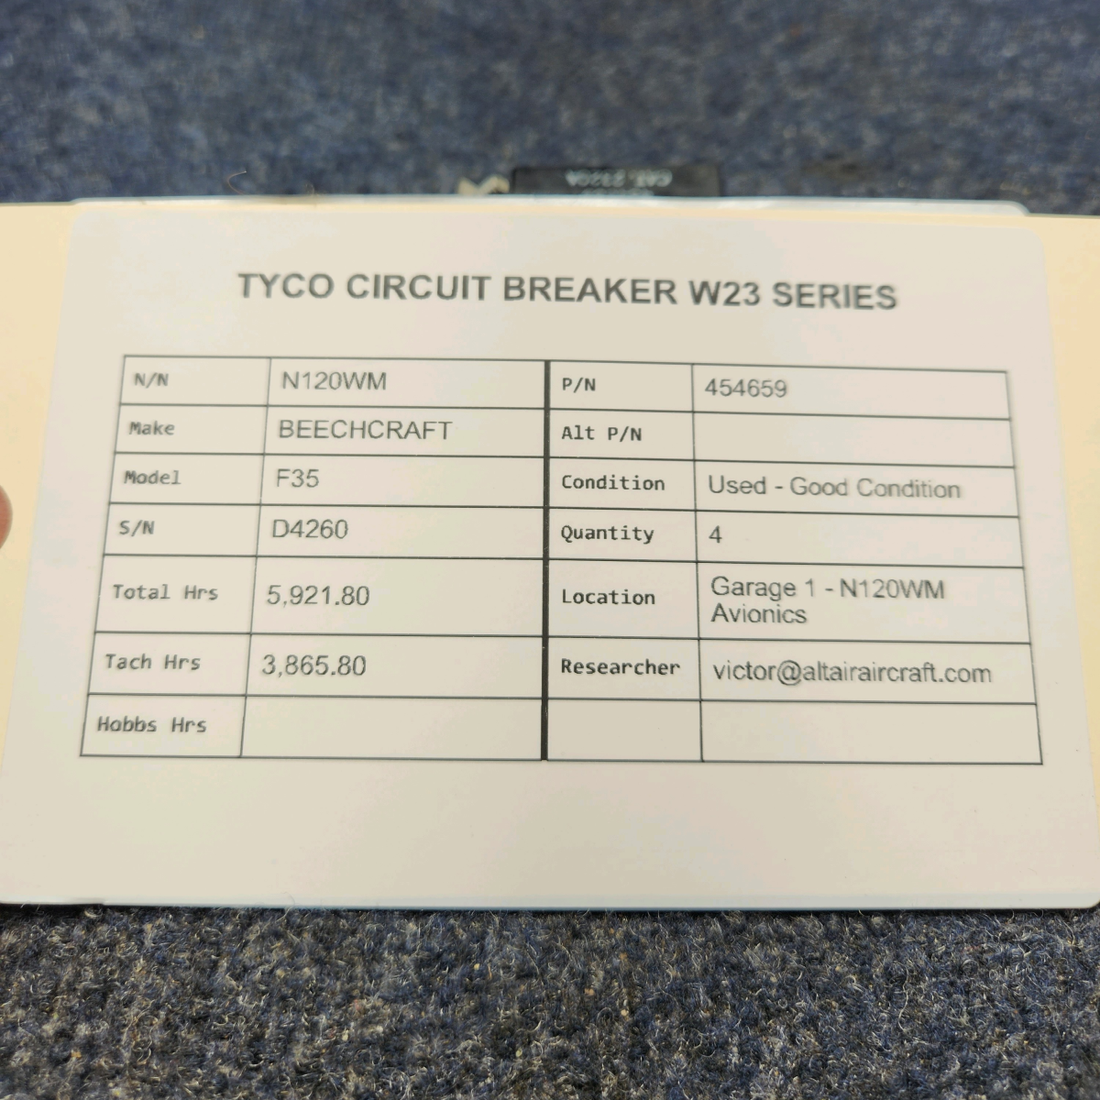 Used aircraft parts for sale, 454659 BEECHCRAFT F35 TYCO CIRCUIT BREAKER W23 SERIES PRICE PER EACH